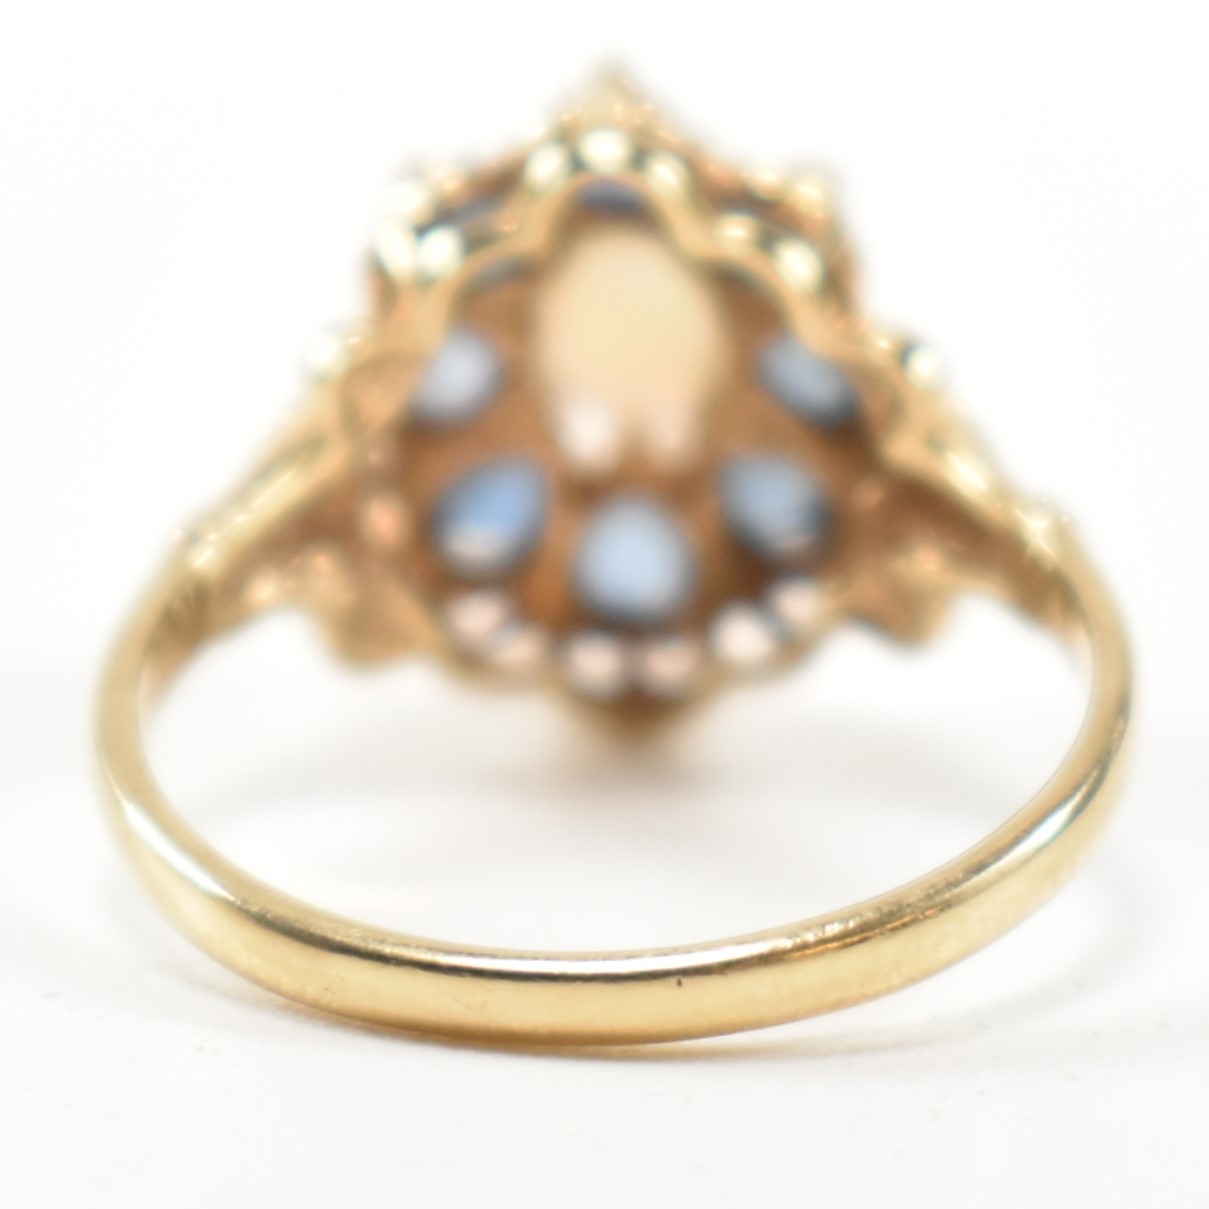 HALLMARKED 9CT GOLD SAPPHIRE & OPAL CLUSTER RING - Image 5 of 11